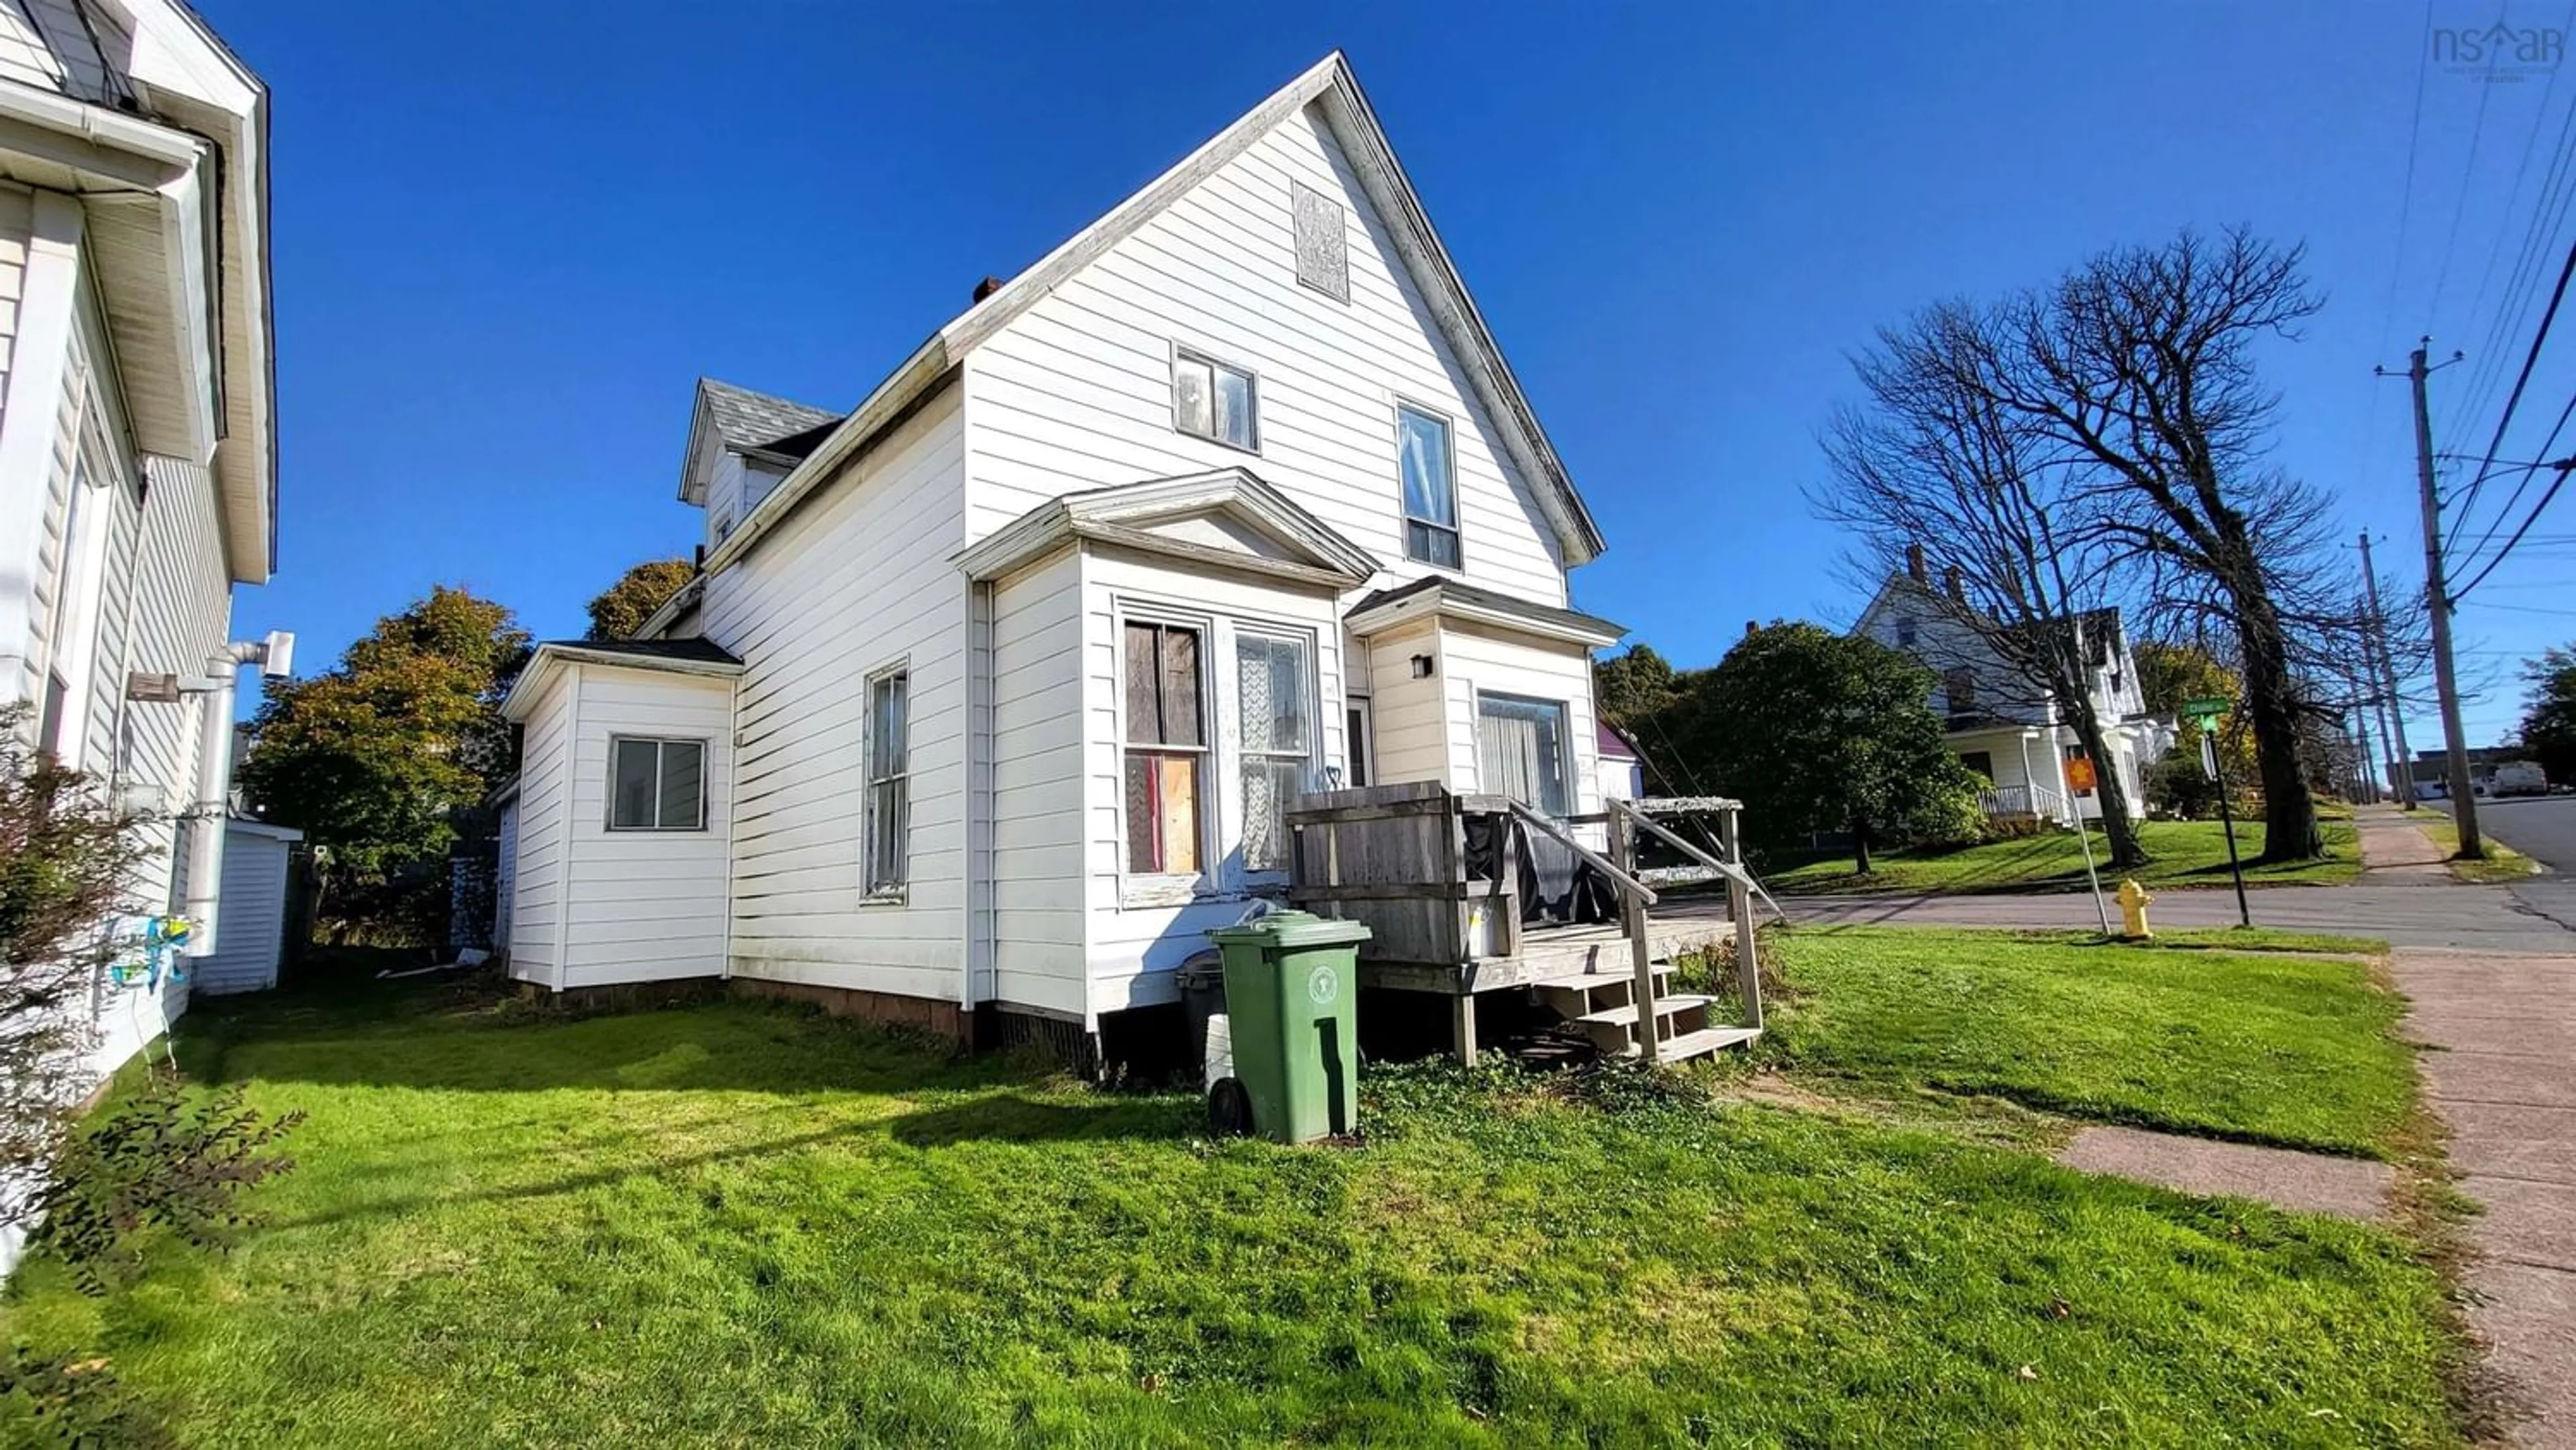 Frontside or backside of a home for 39 Laplanche St, Amherst Nova Scotia B4H 3G9